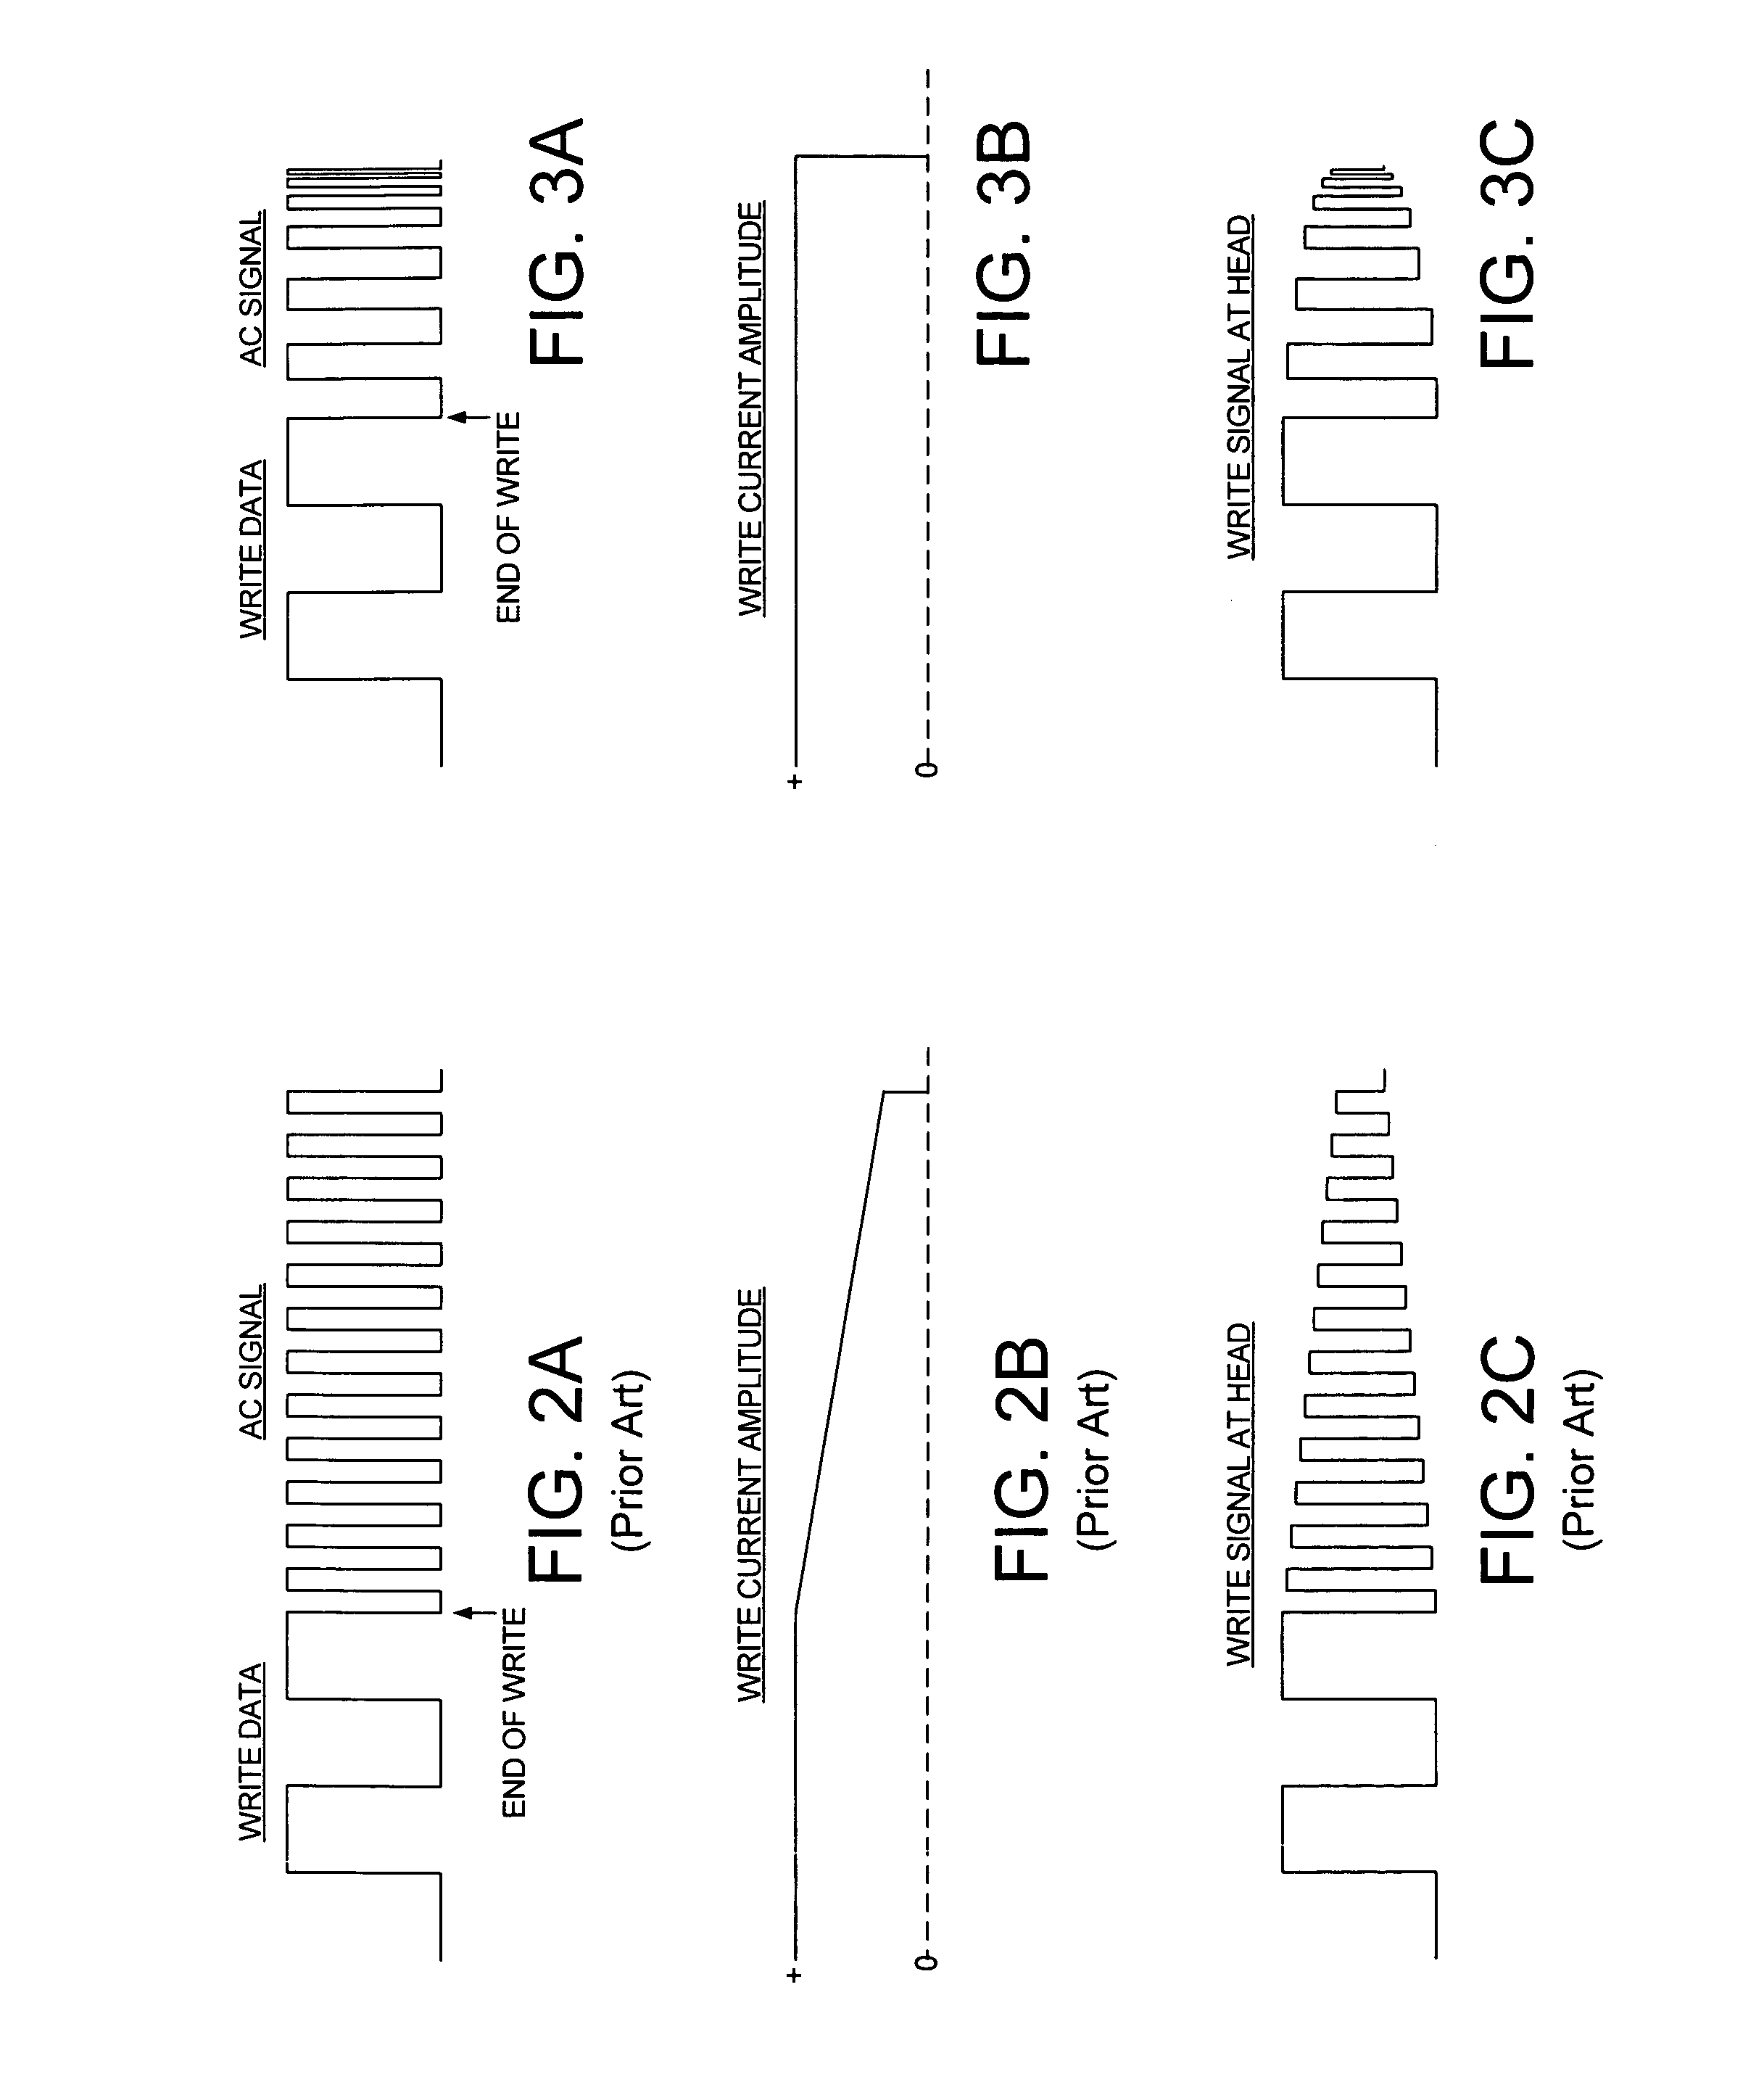 Demagnetizing a head in a disk drive by increasing the frequency of an AC write signal while maintaining the write current amplitude